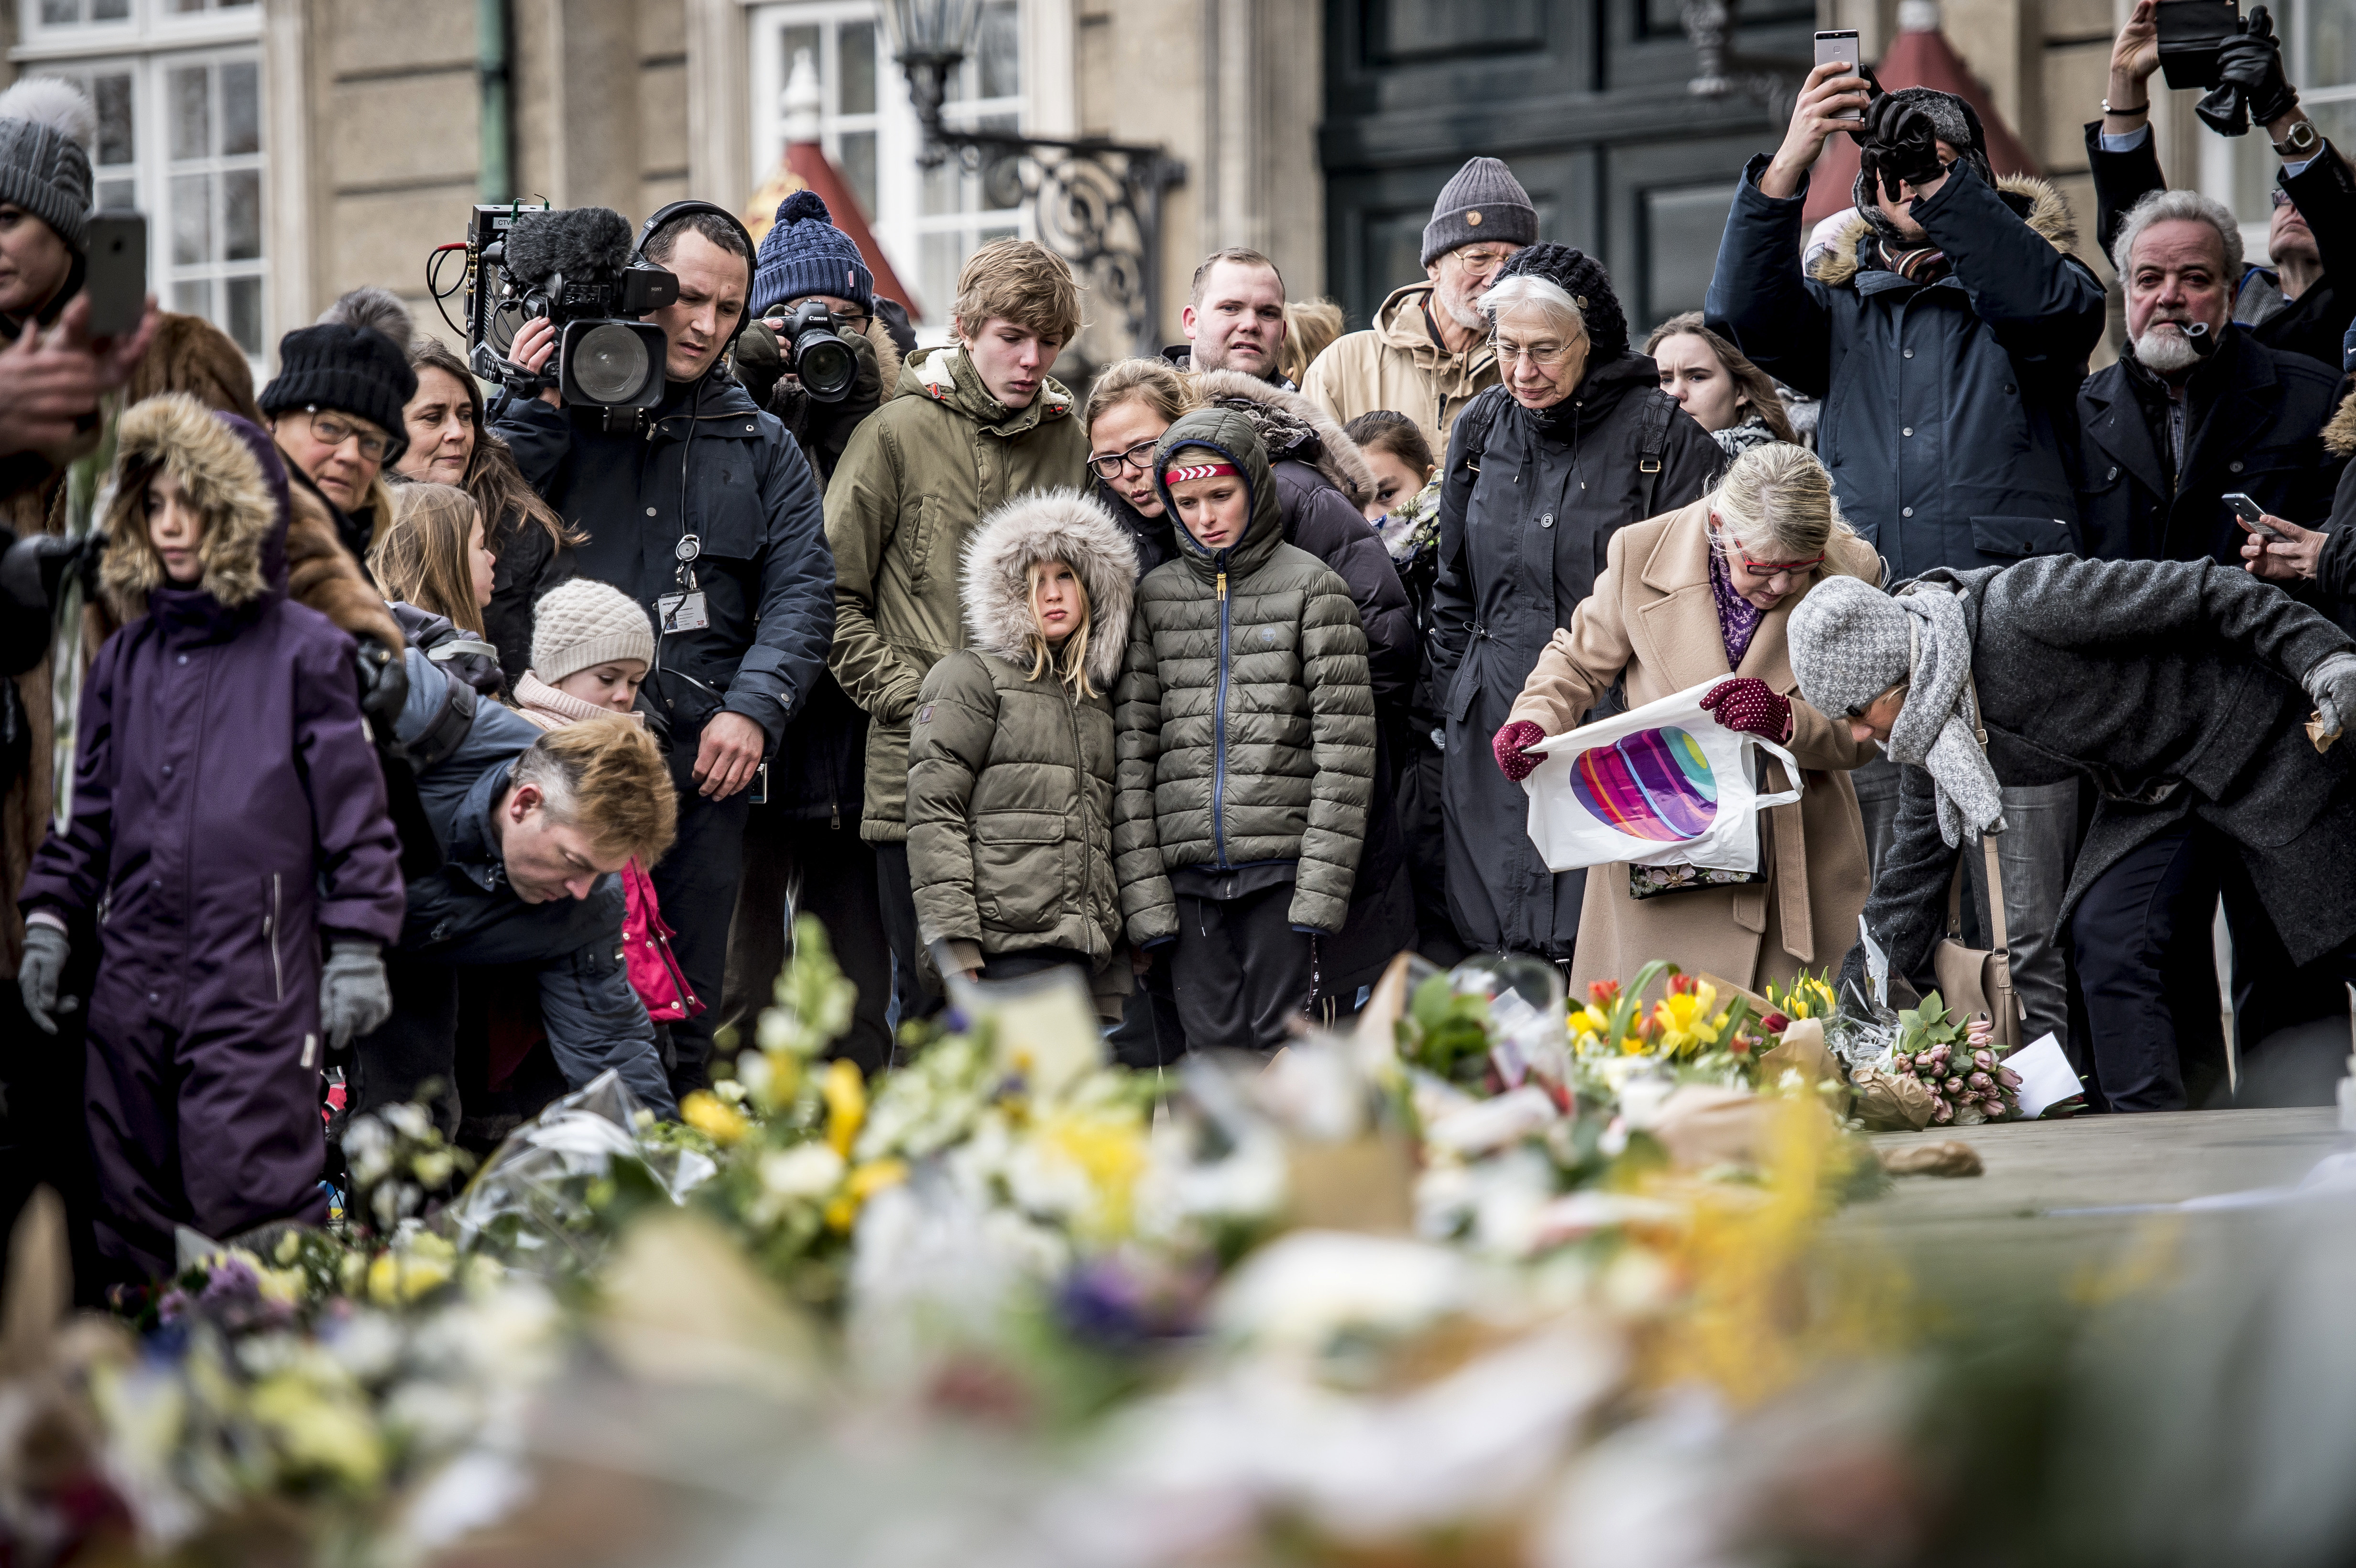 People gather to see and place floral tributes in front of the Amalienborg Palace in Copenhagen, Denmark (Mads Claus Rasmussen/Ritzau Scanpix via AP)